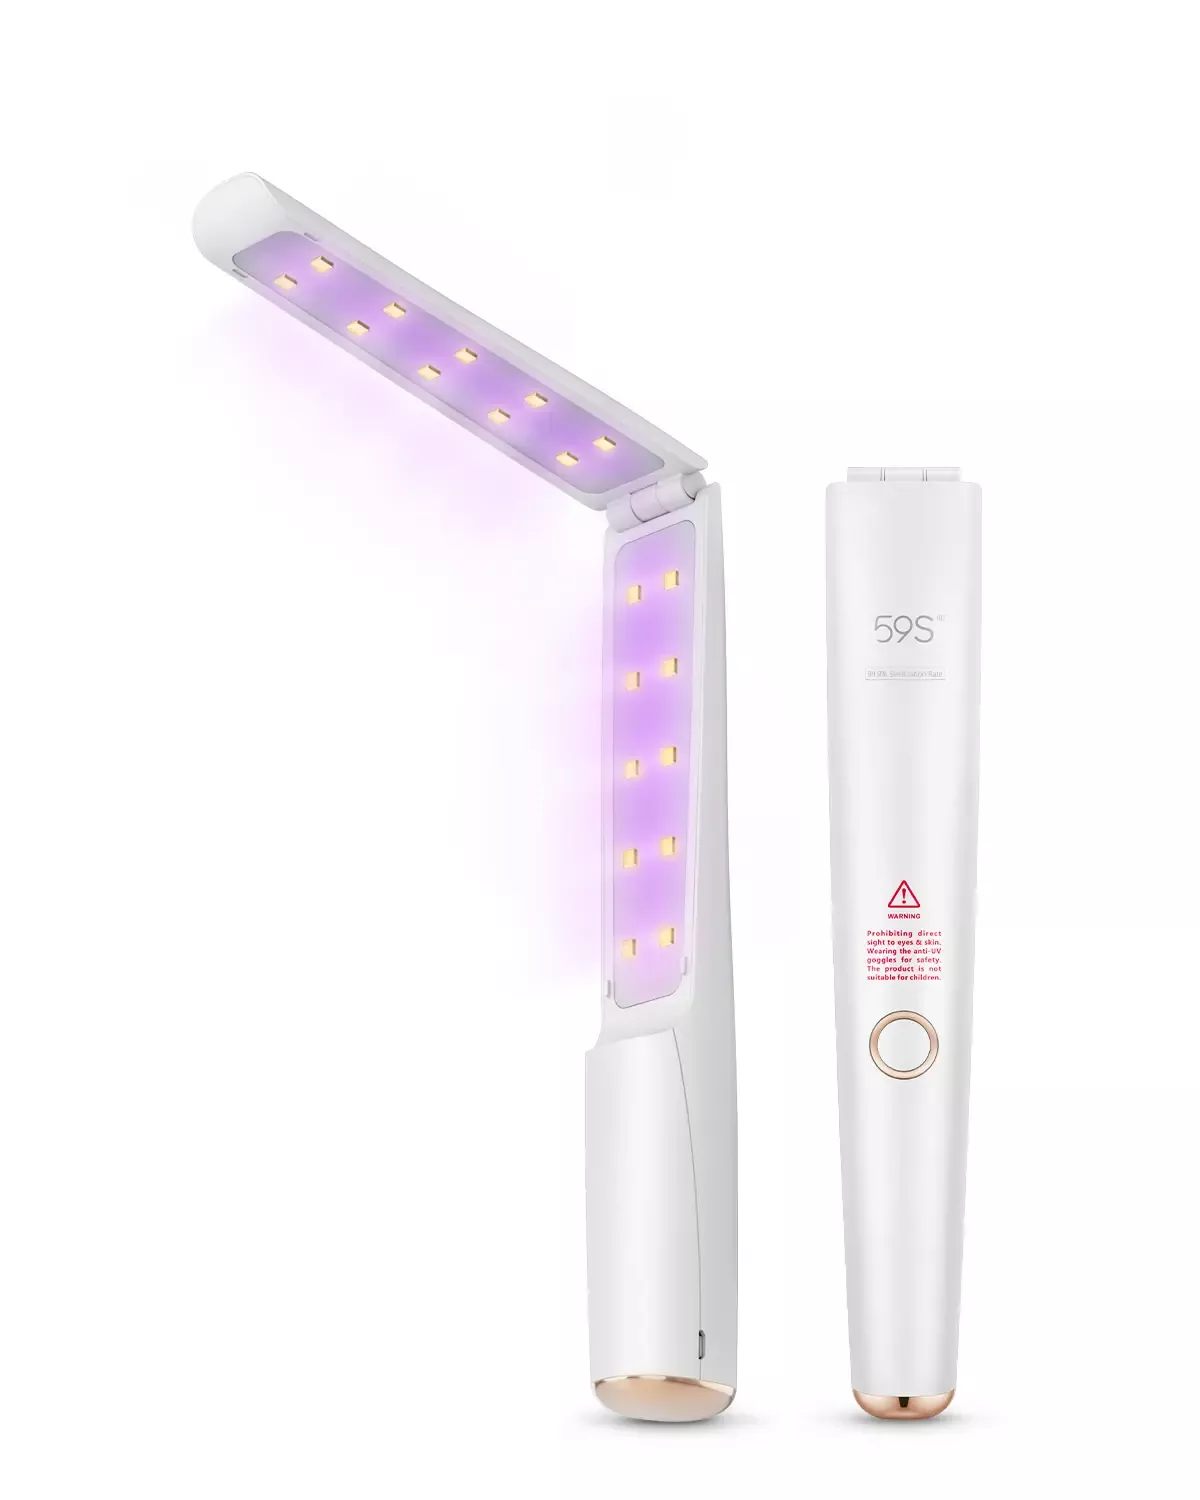 59S Sterilizer UV Wand, Sterilizer UVC Portable, Rechargeable Disinfection Lamp with 20 UVC LED Lights, Sterilization Lamp Wand for Home Office Hotel Car Pet Area(DO NOT sell in Amazon)